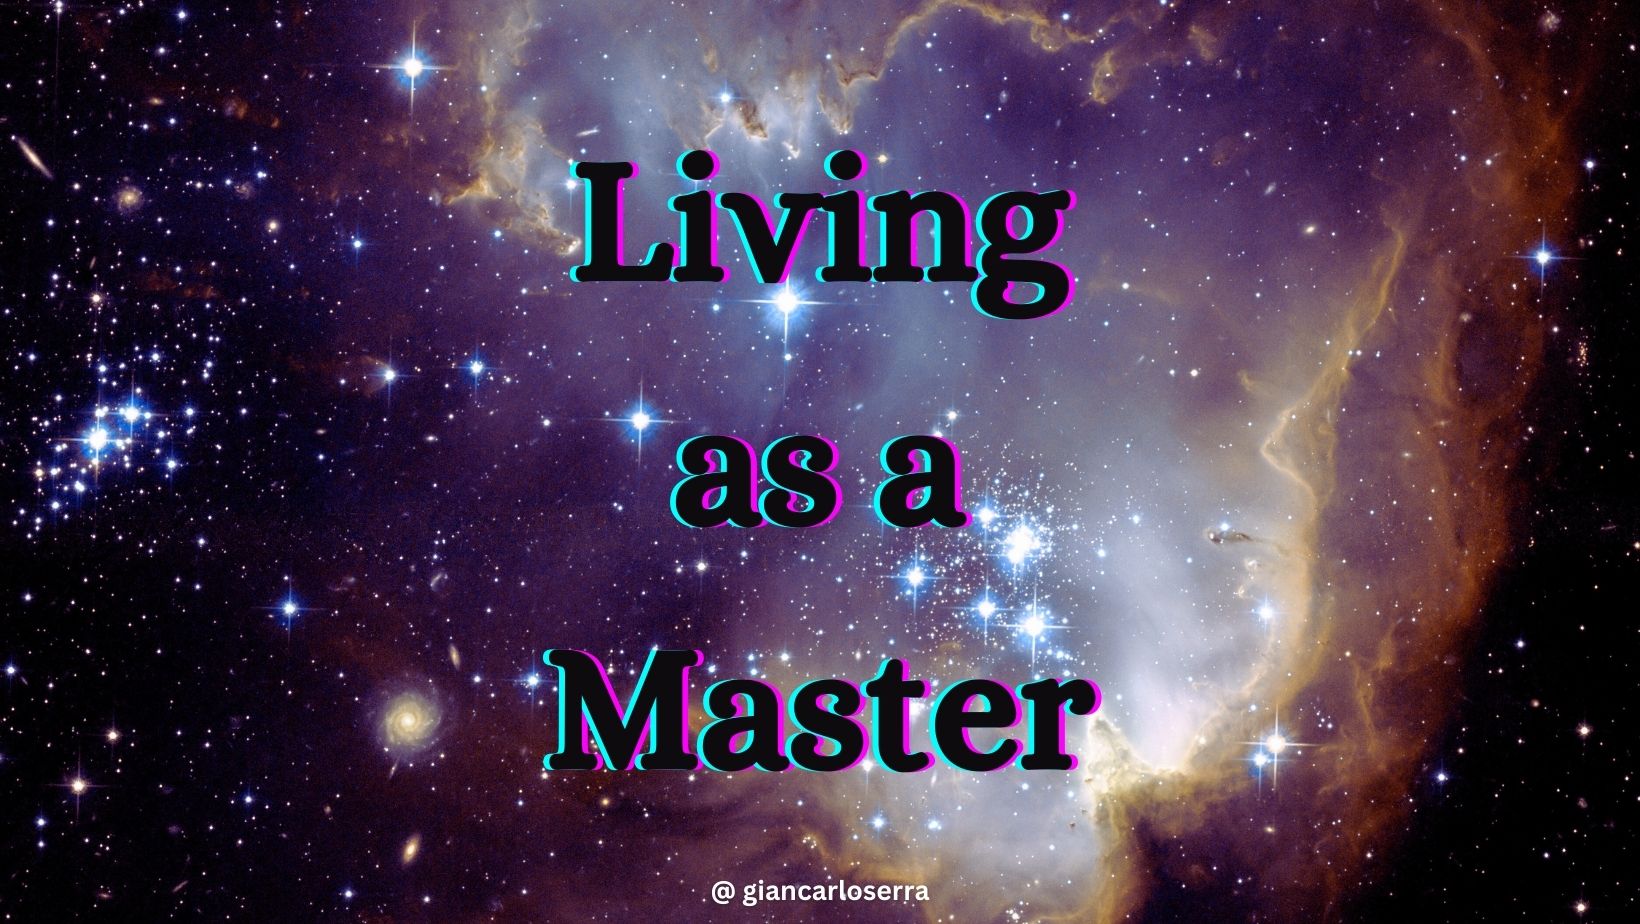 living as a Master